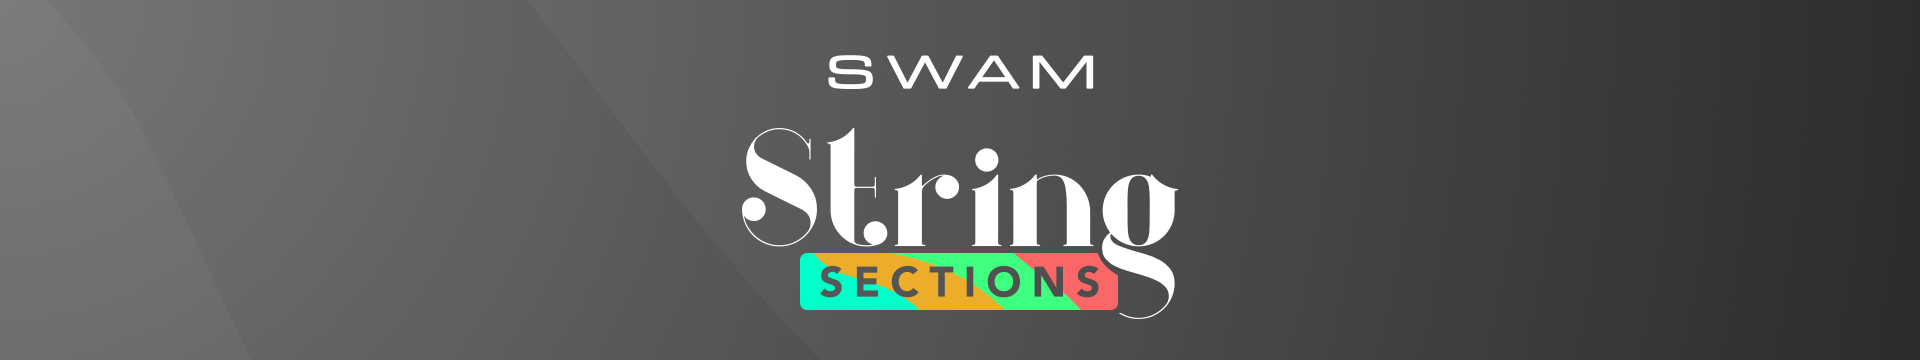 Release note SWAM string sections